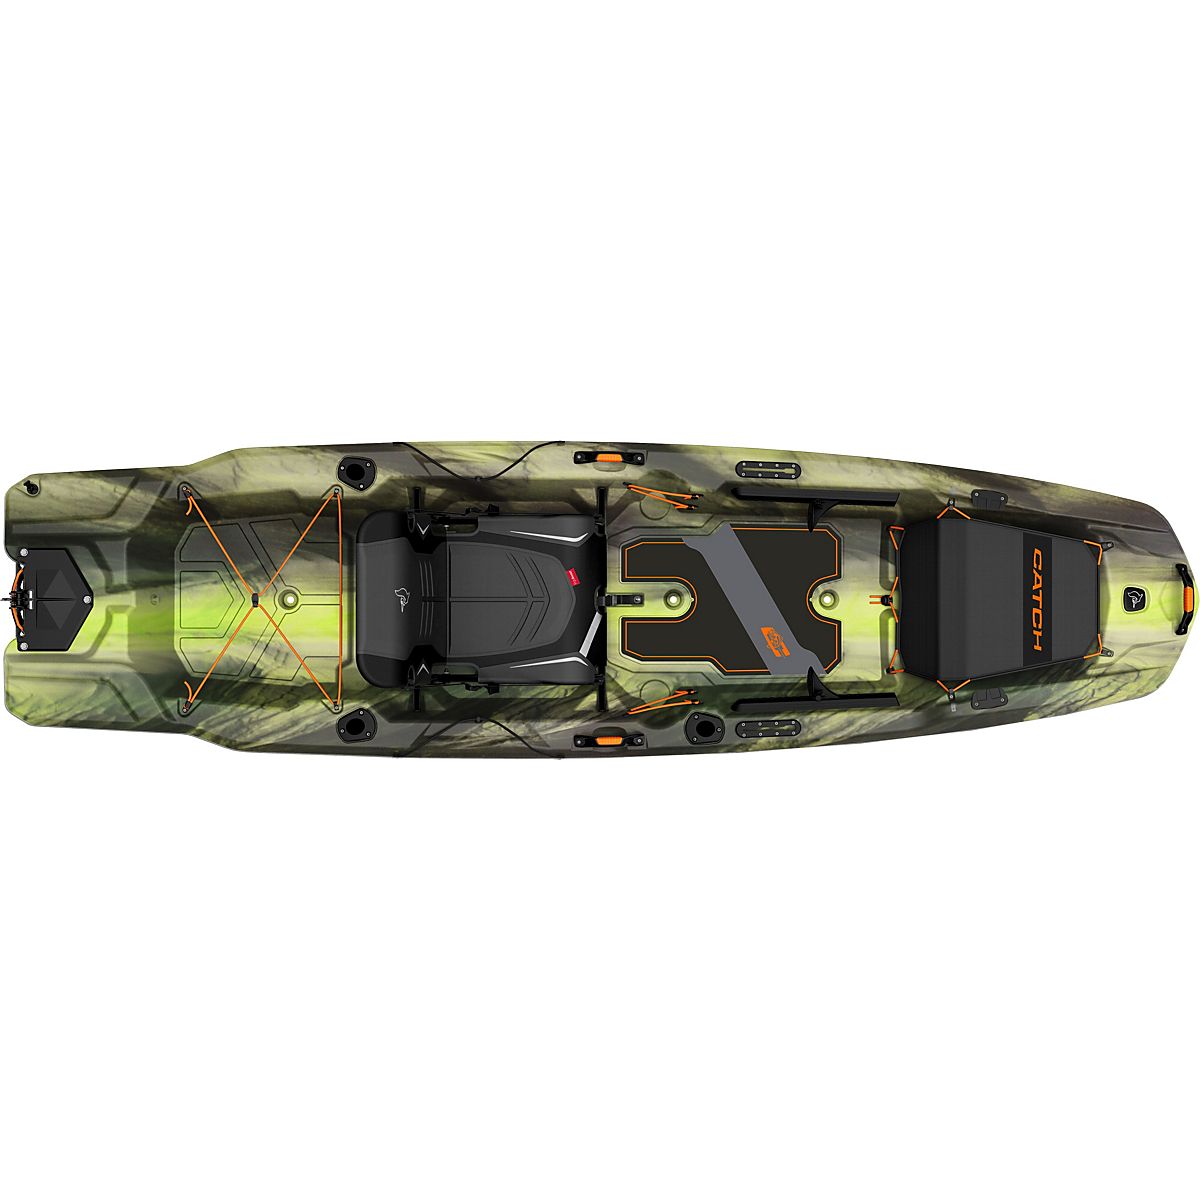 Does It Flip? Pelican Catch Mode 110 Kayak Stability Test and Fishability 